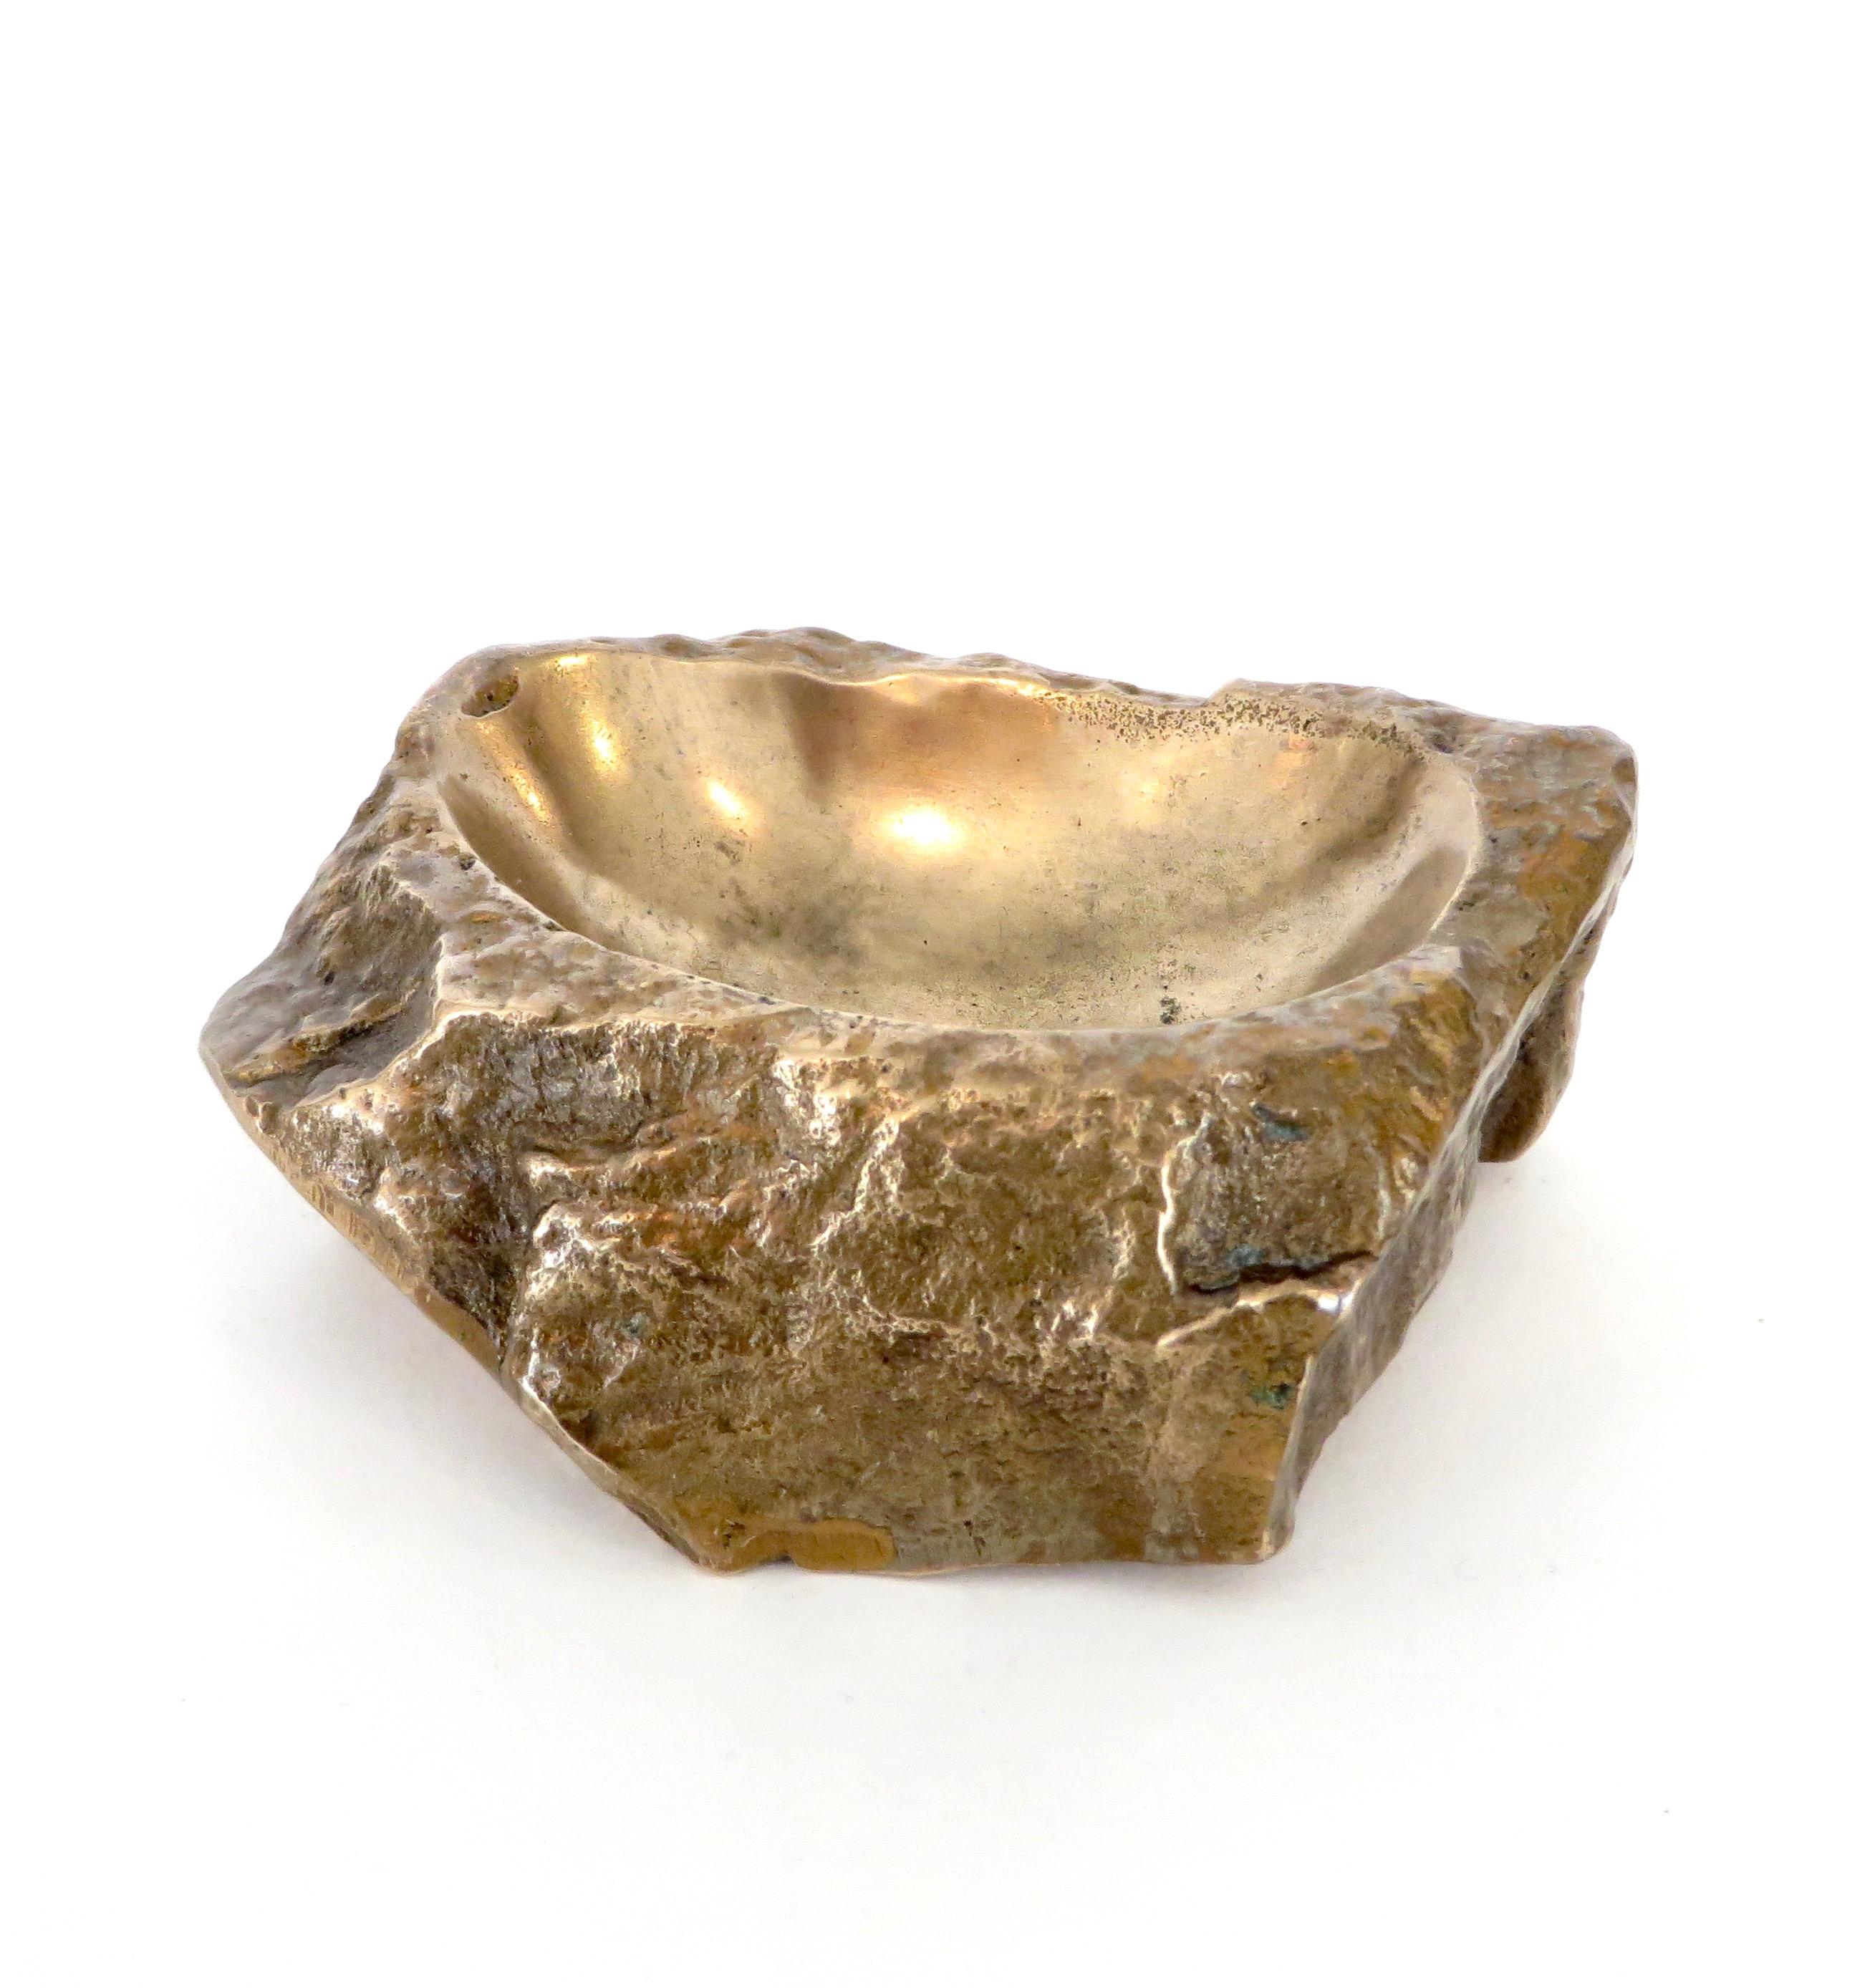 French artist Monique Gerber vintage sculptural bronze abstract rock form vide poche or ashtray.
The signature is difficult to read.
Patina is beautiful and shows its age.
Documentation available of similar items.